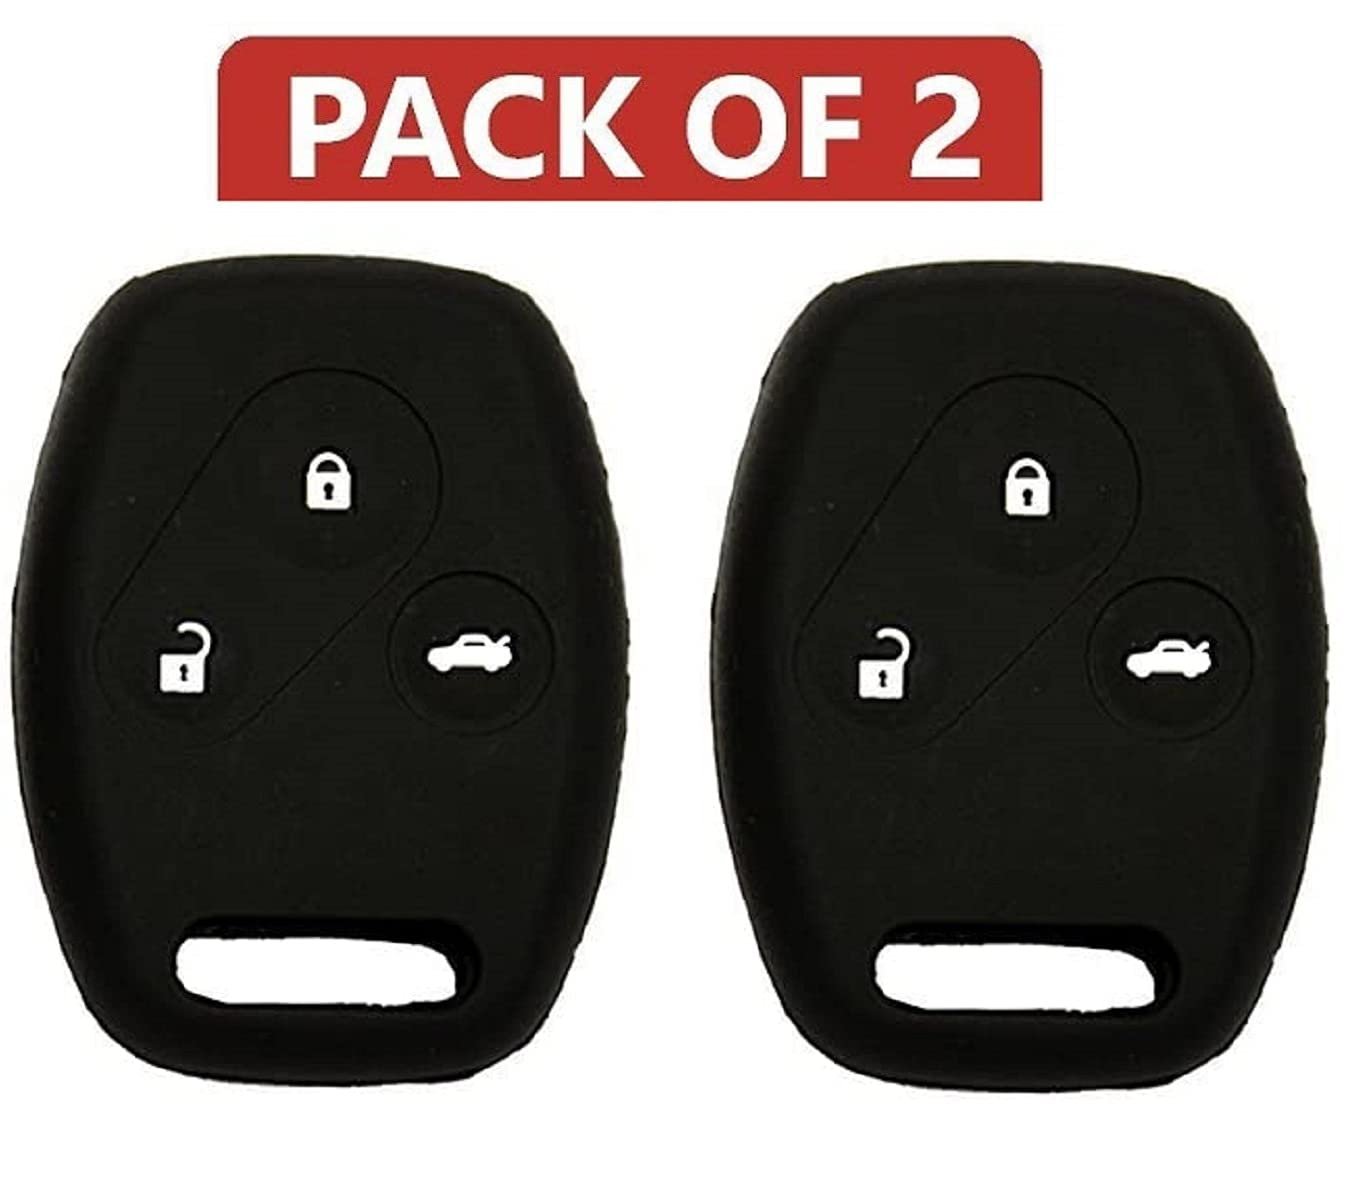 3 Button Black Silicone Car Key Cover Compatible with Honda Accord (Black, Pack of 2) Image